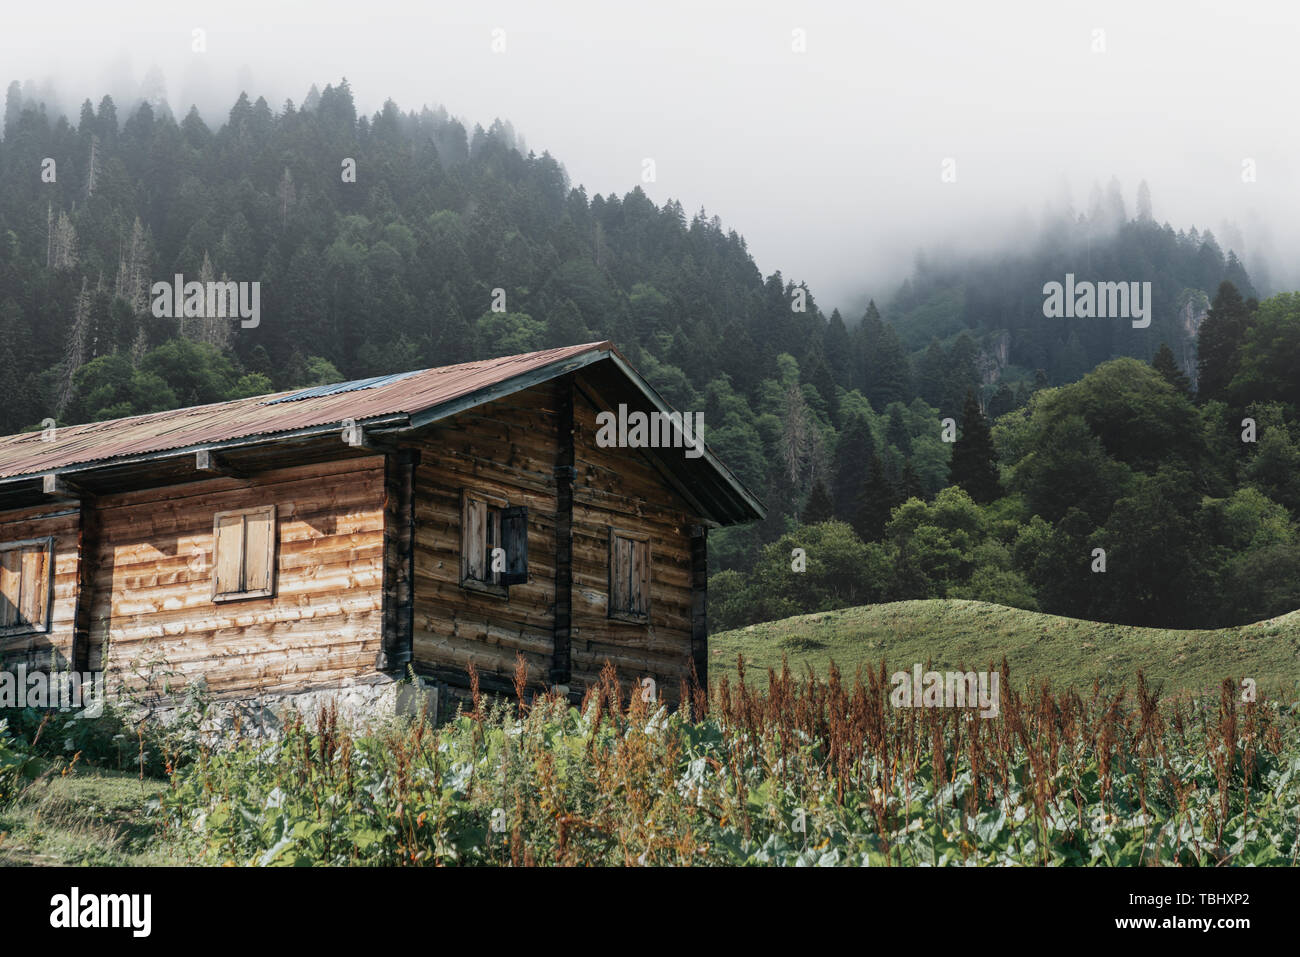 Wooden old bungalow house in nature with,mist and mountain. Rize, Turkey Stock Photo